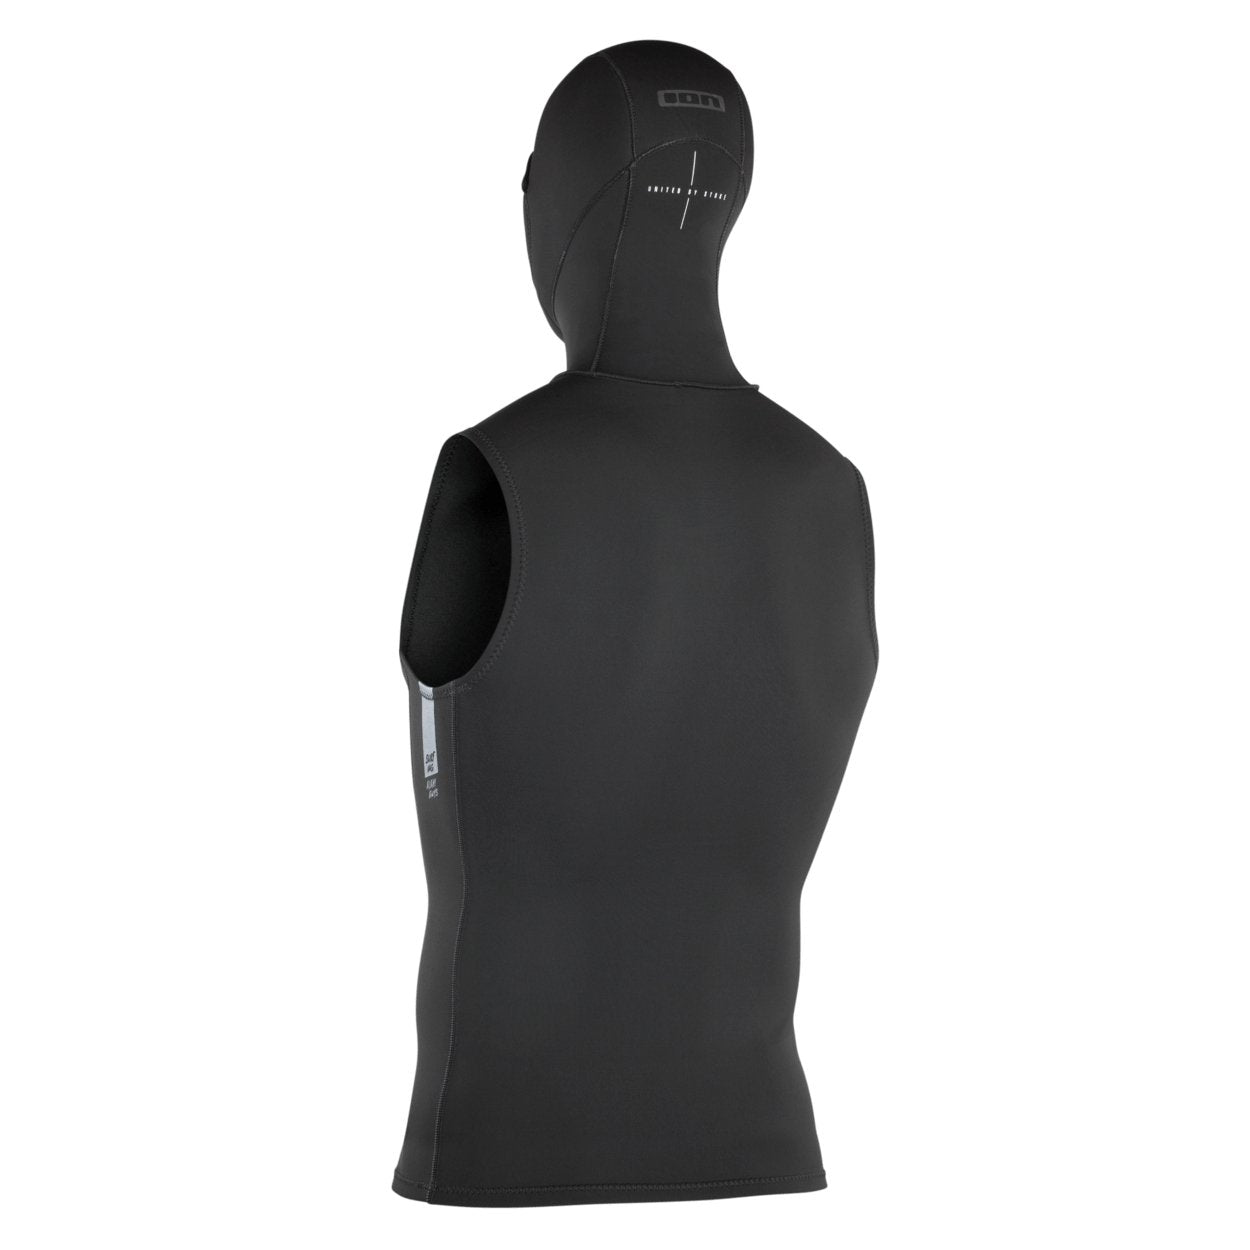 ION Neo Top Hooded Vest 2/1 2022 - Worthing Watersports - 9008415882526 - Neo Accessories - ION Water